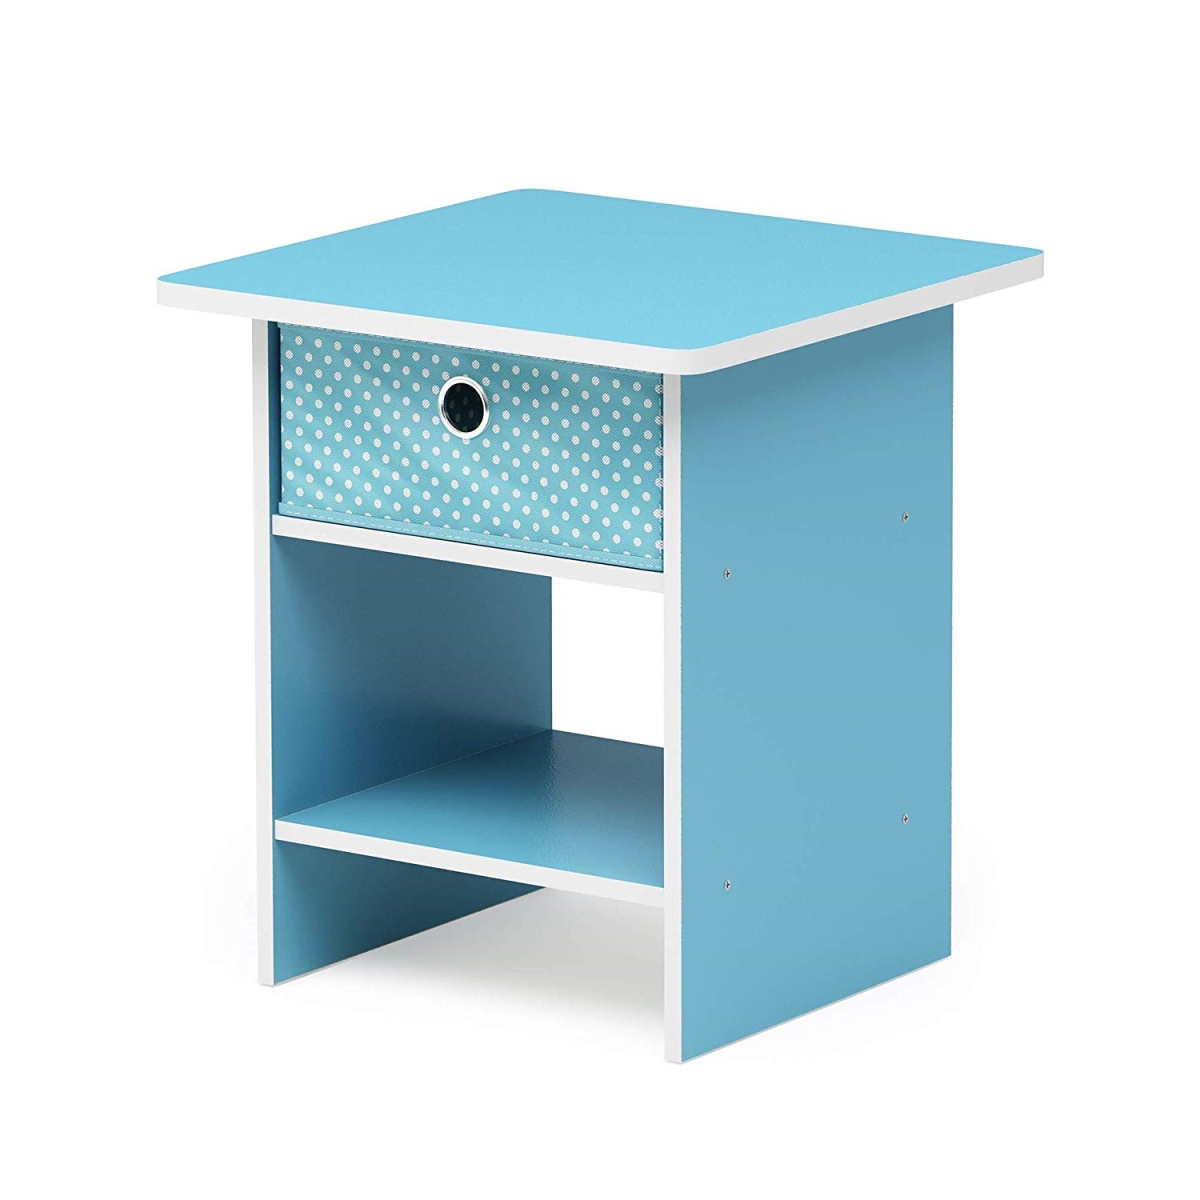 10004lbl-lbl End Table & Night Stand Storage Shelf With Bin Drawer, Light Blue - 17.8 X 15.5 X 15.5 In.